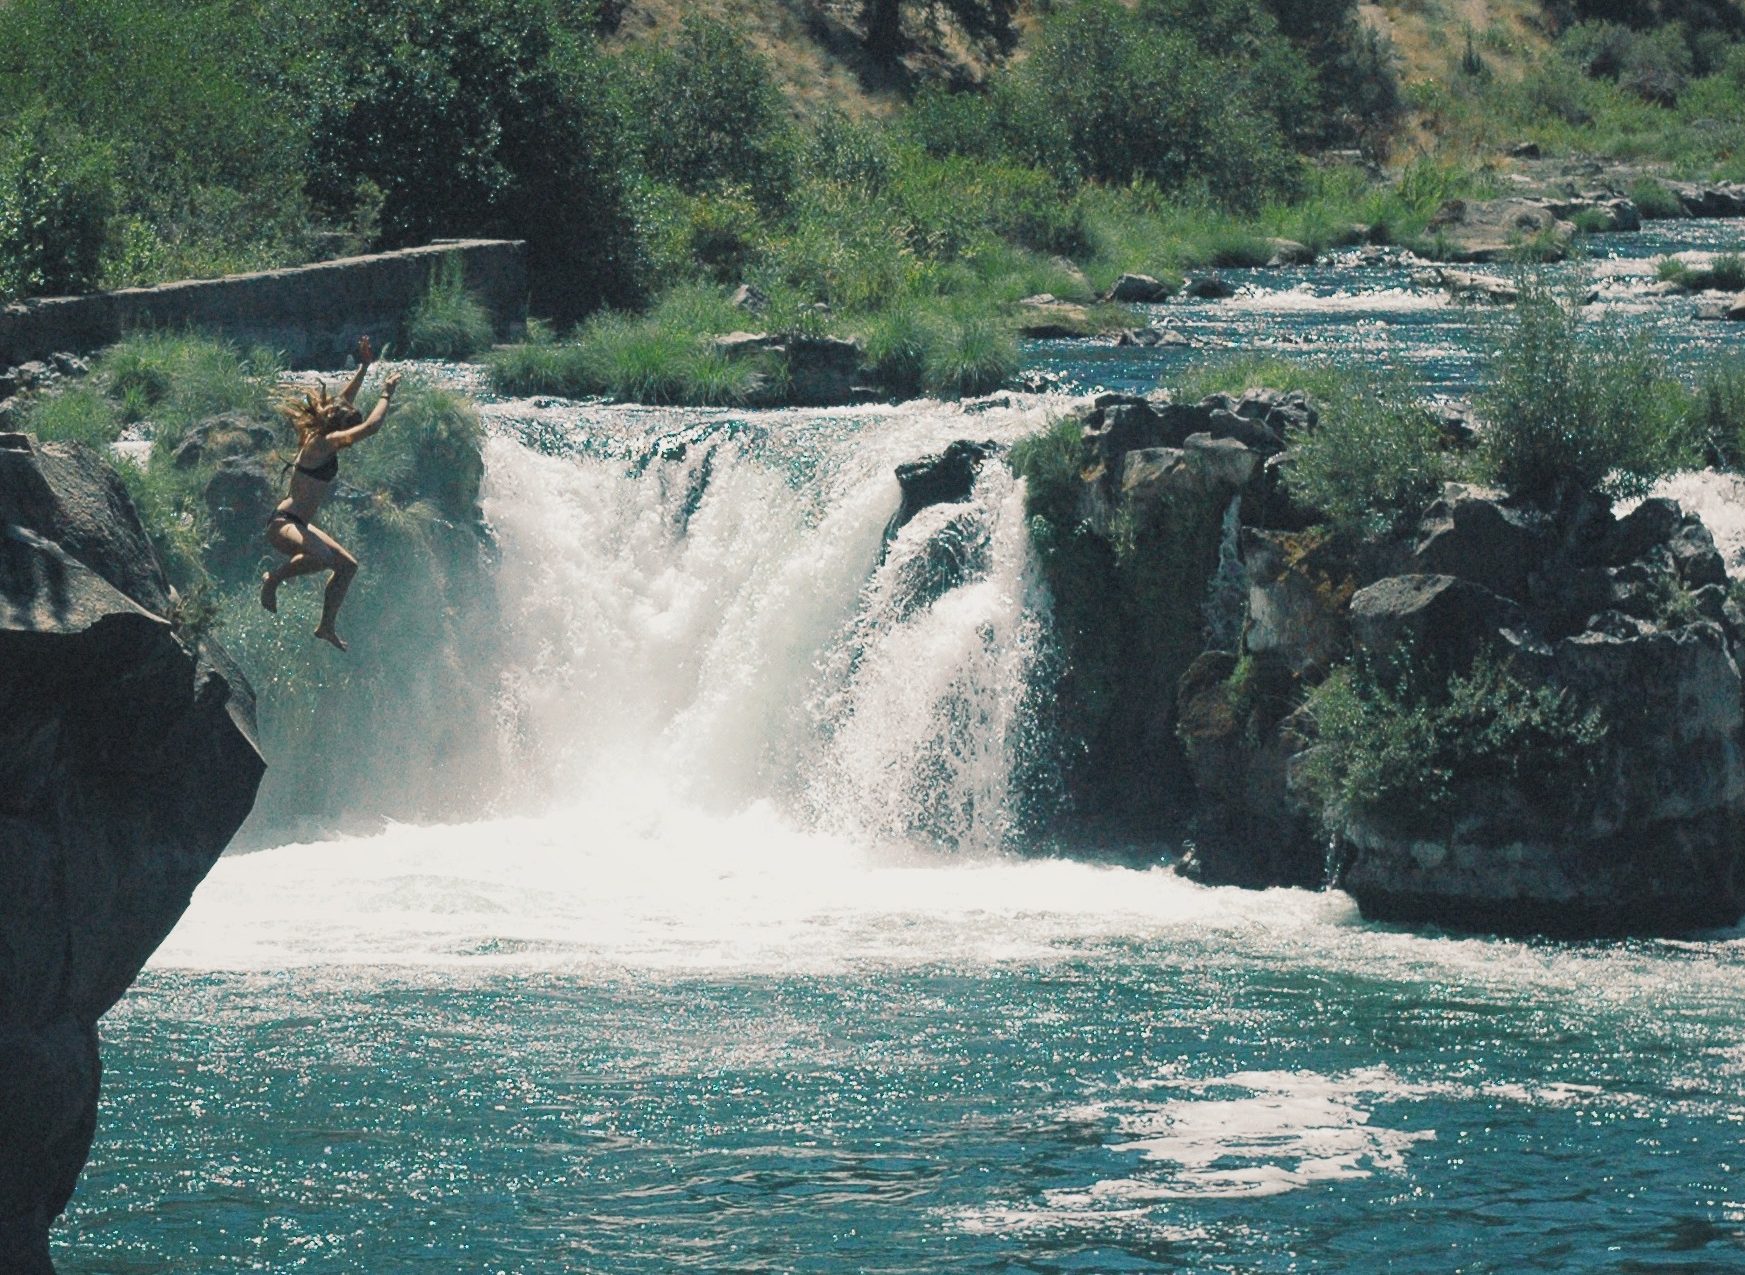 Naomi cliff jumping near a waterfall. Sometimes you've got to leap!